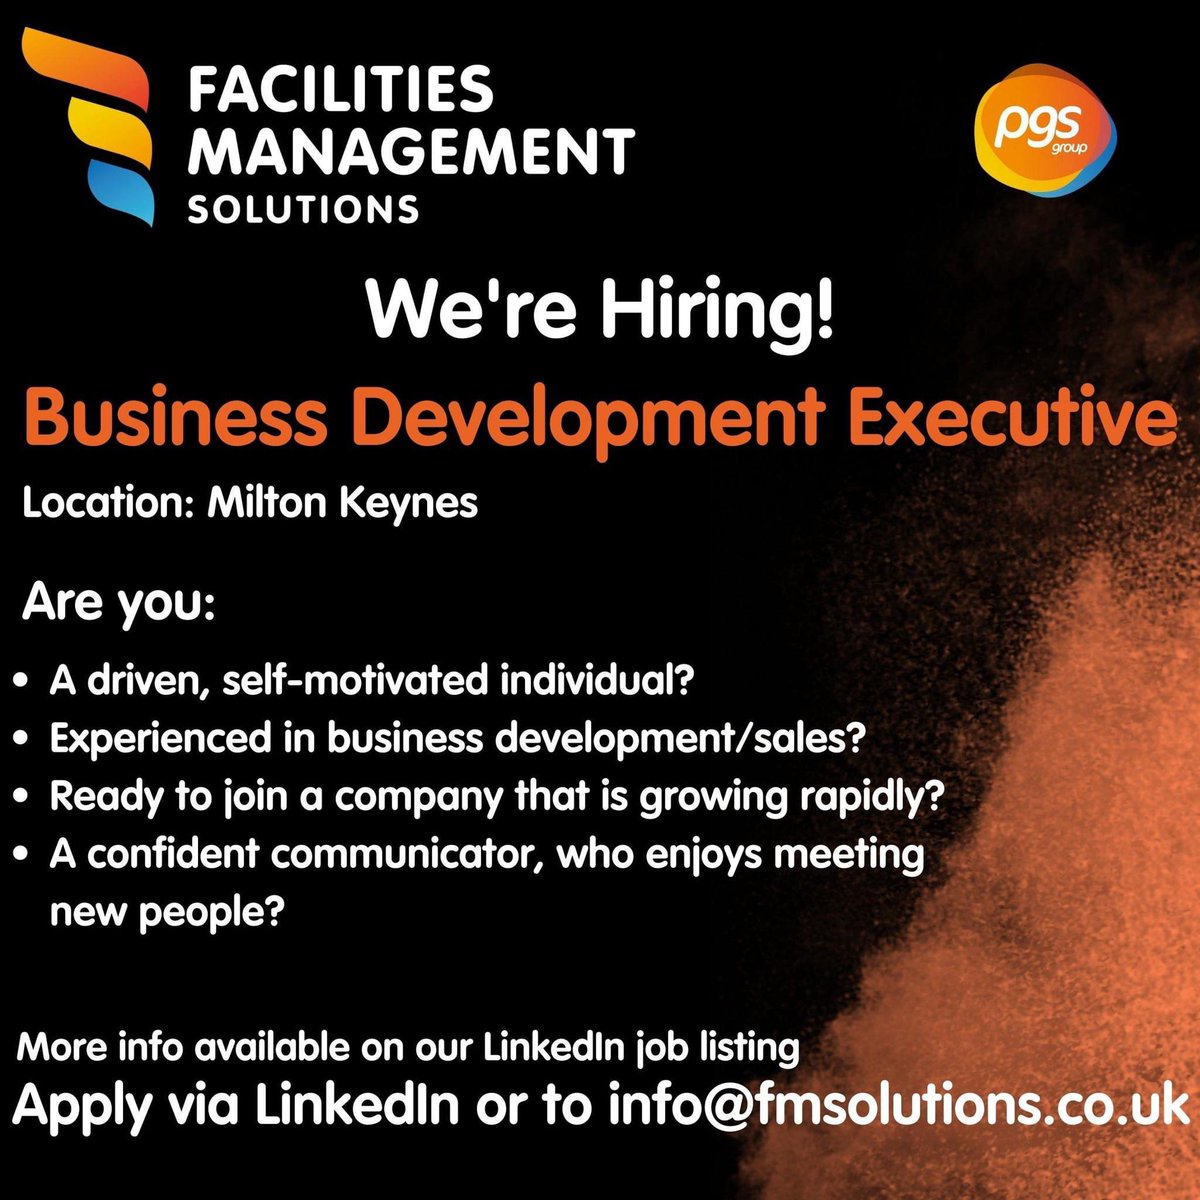 We're #Hiring!

At Facilities Management Solutions, we are looking for a self-motivated, sales-driven Business Development Executive to join our team.

If that sounds like you, check out the listing here: linkedin.com/jobs/view/3702… 👈

#WereHiring #MKJobs #JobsMK #MiltonKeynesJobs